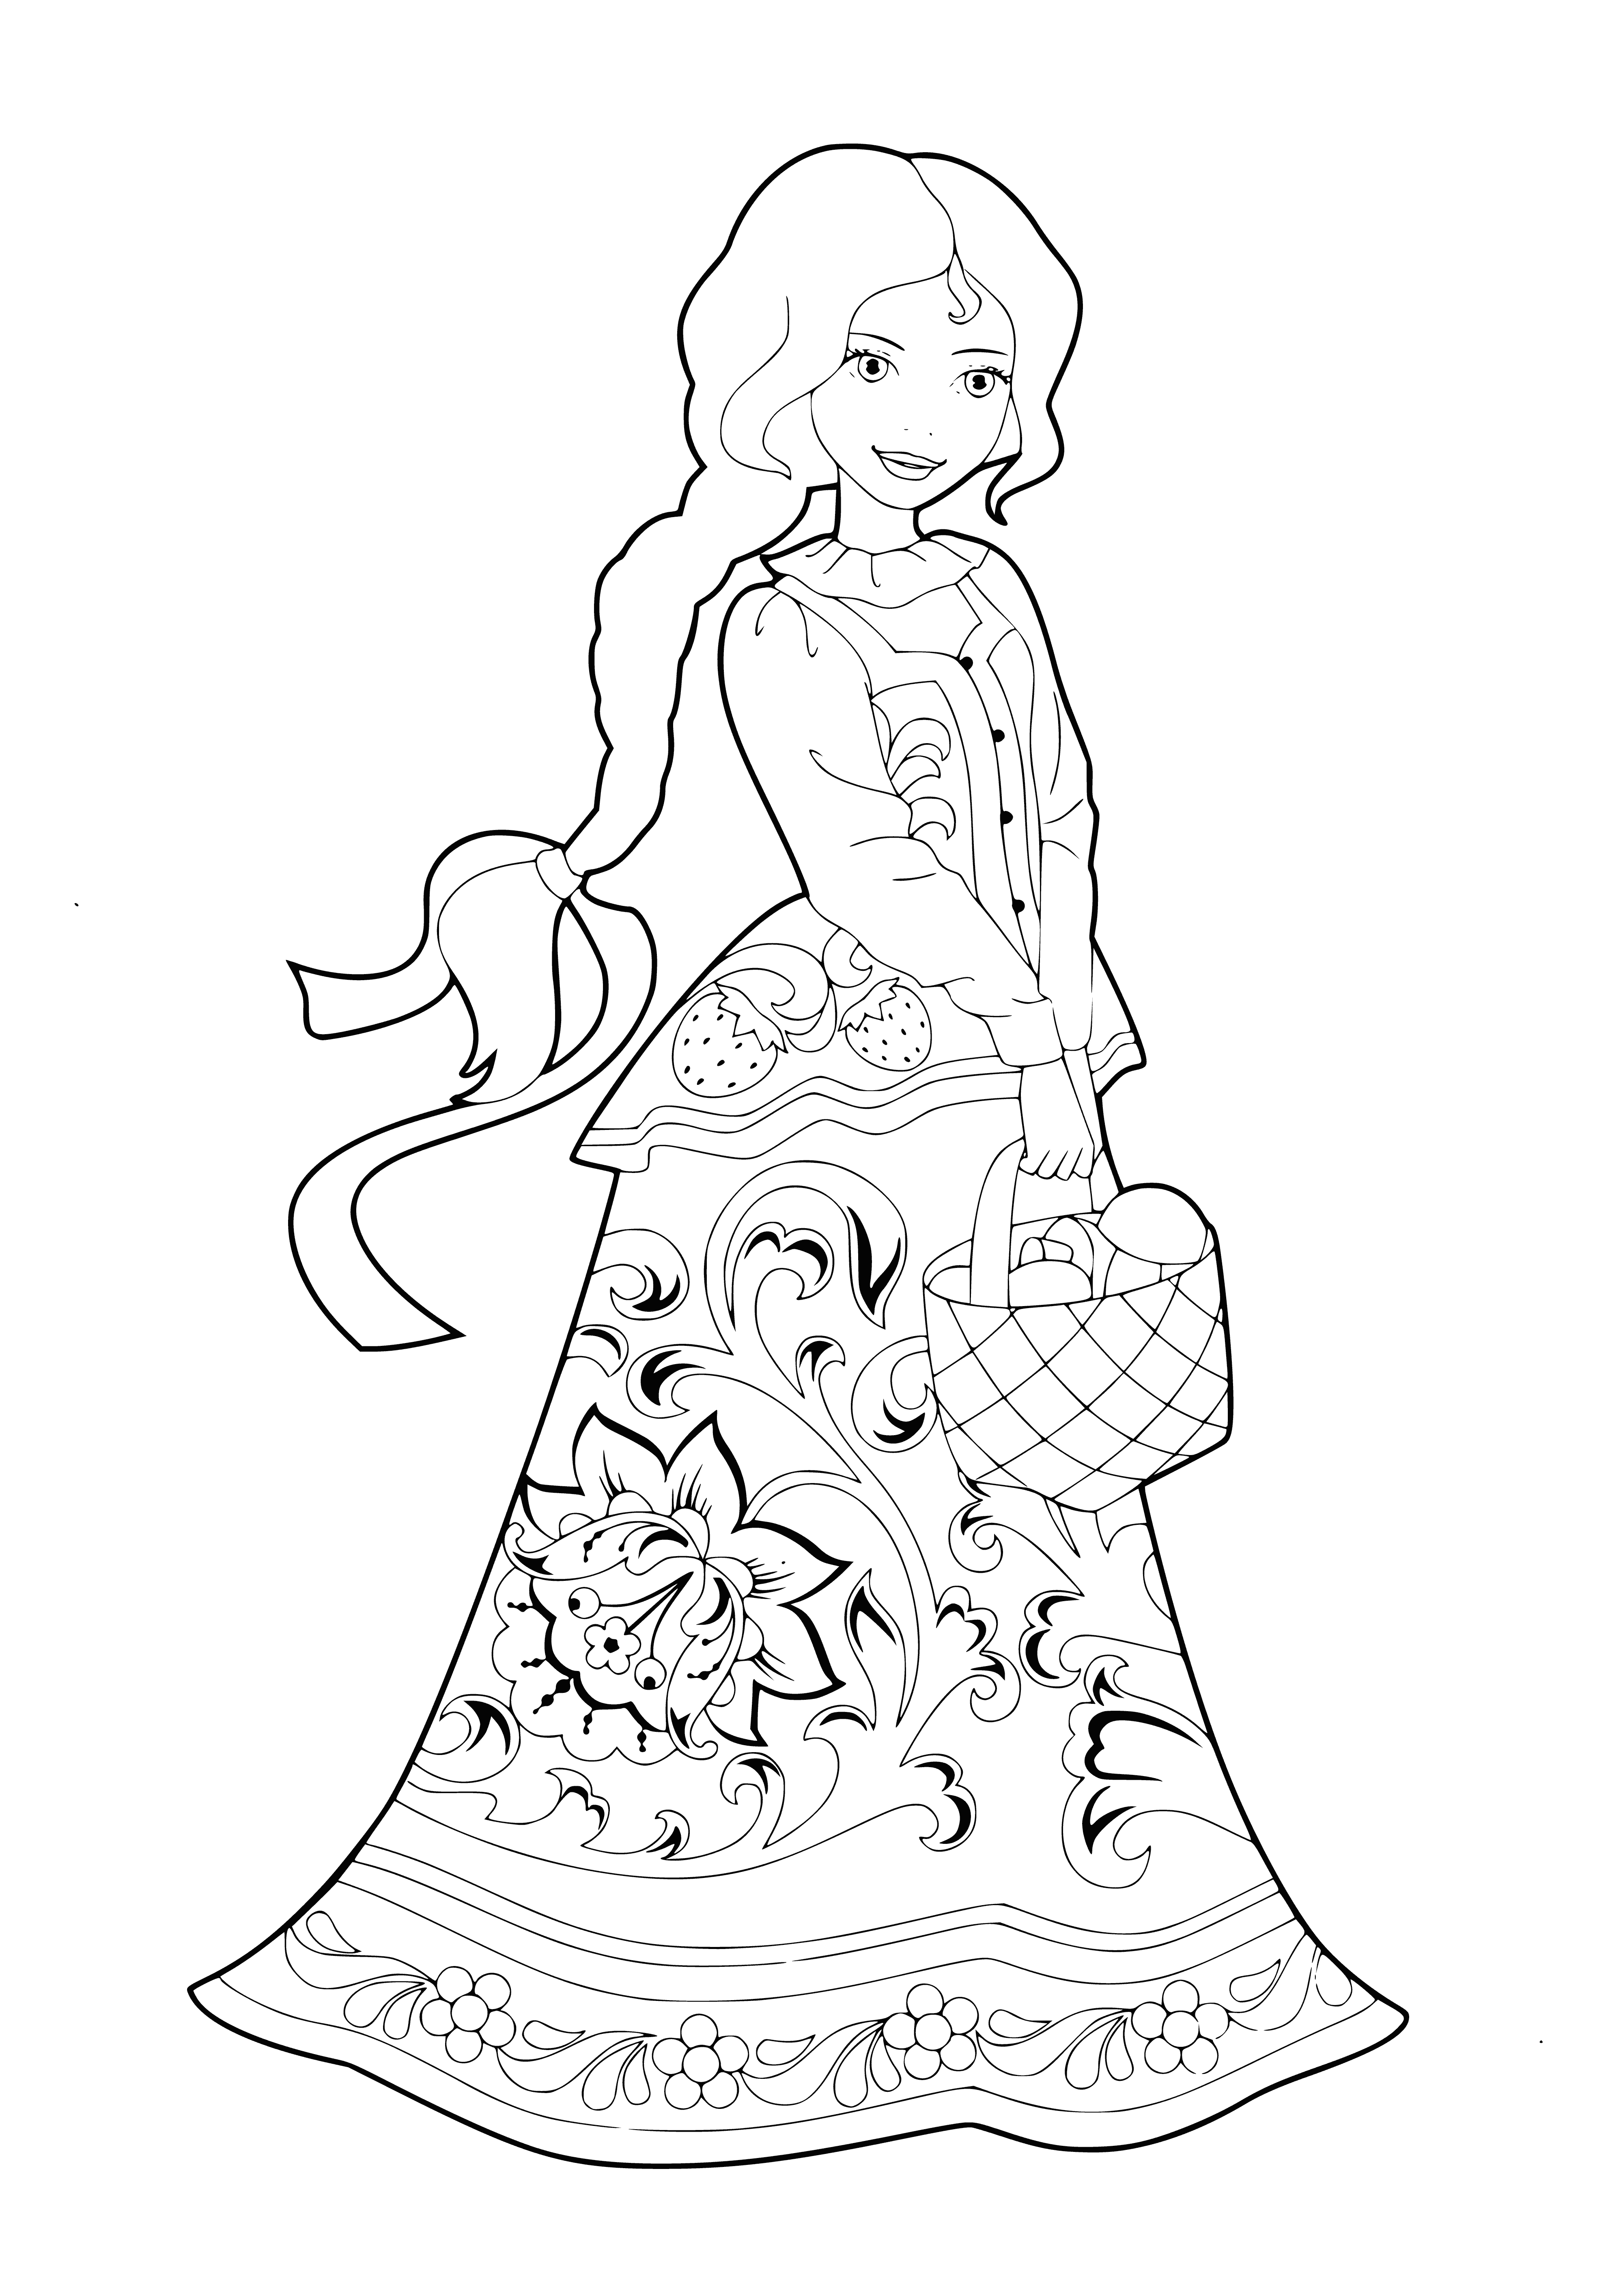 coloring page: Five beautiful women, flowy hair, blue/green eyes, light-colored dresses; two holding flowers; central woman is holding a child.